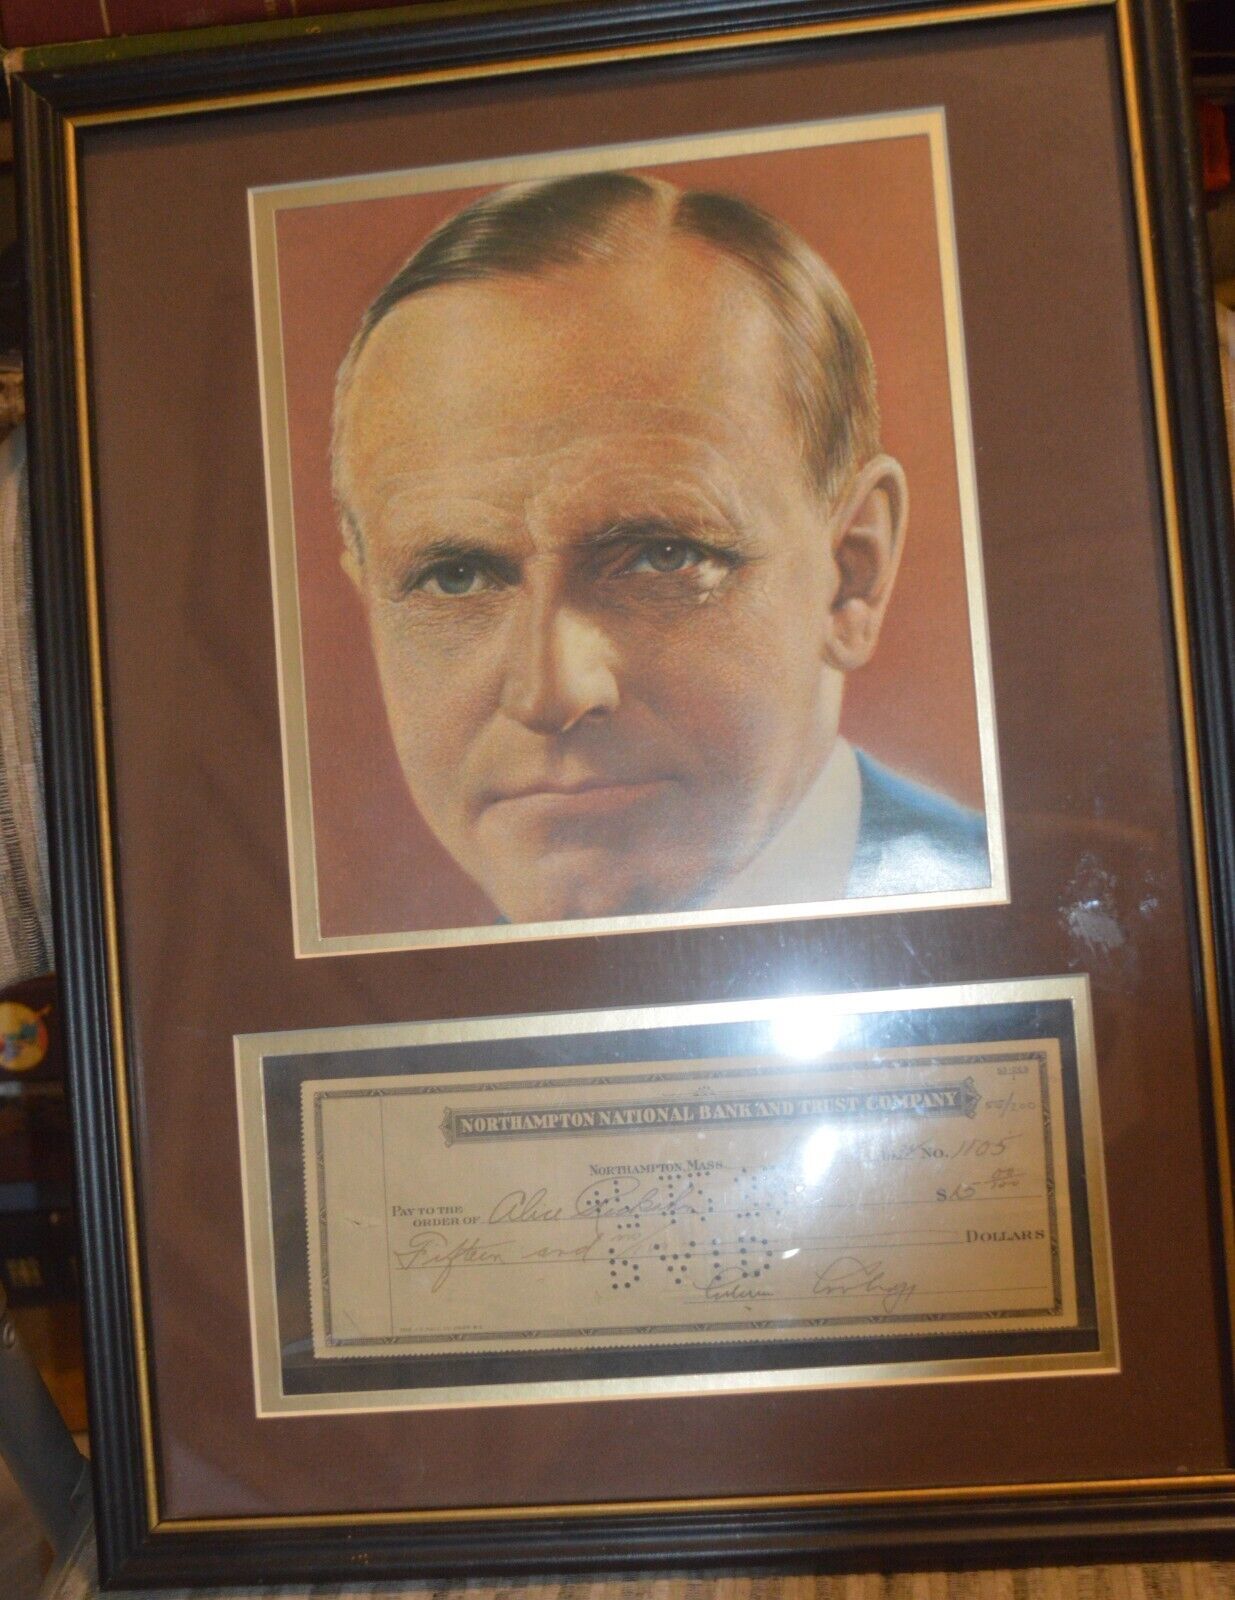 Primary image for Framed check & Photo, Signed by Calvin Coolidge, POTUS, 1932